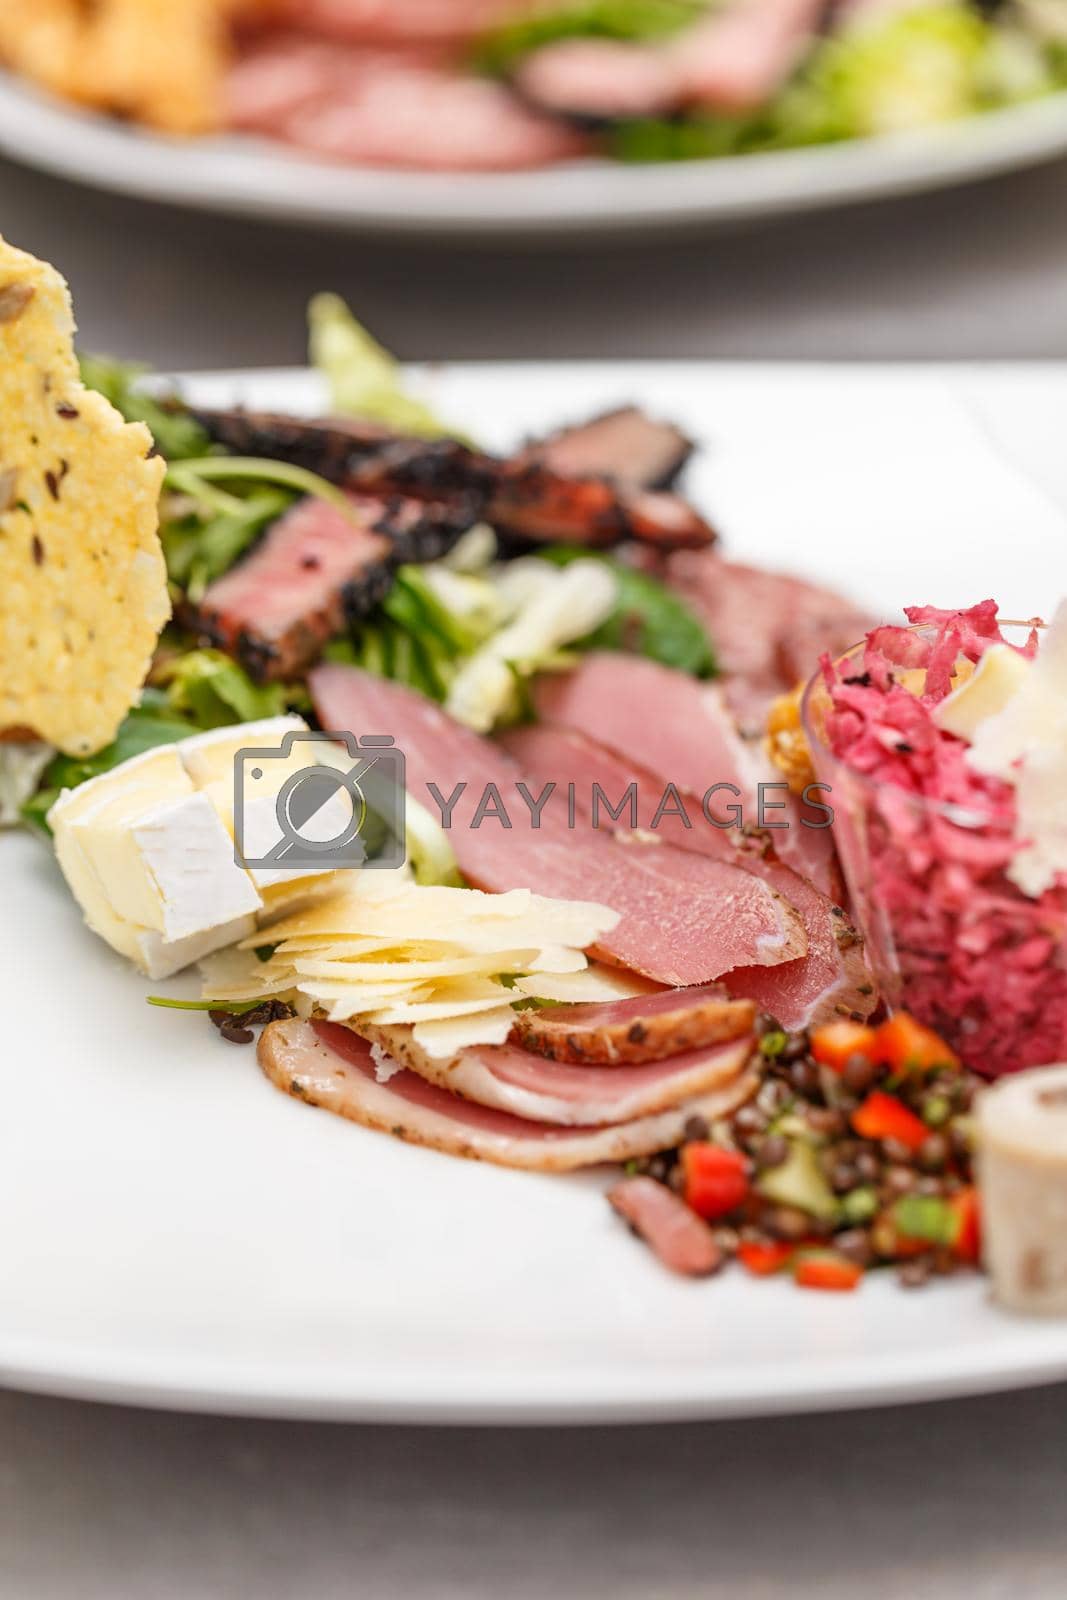 Royalty free image of Appetizer served on a plate by grafvision